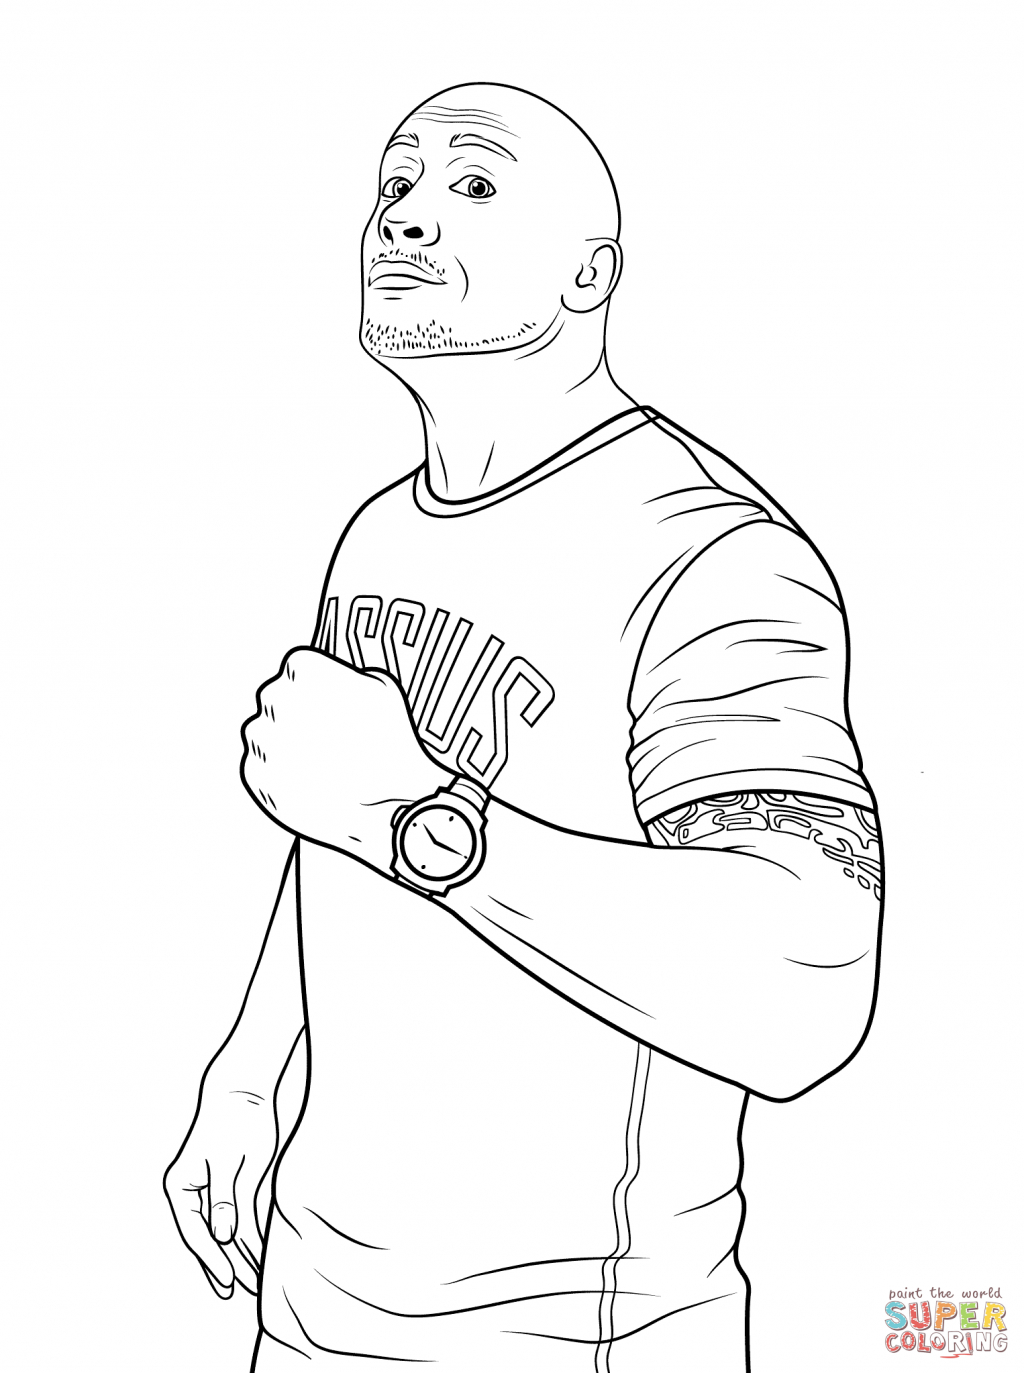 Wwe Wrestling Coloring Pages Absolutely Design Wwe Pictures To Color Wwe Coloring Pages Free